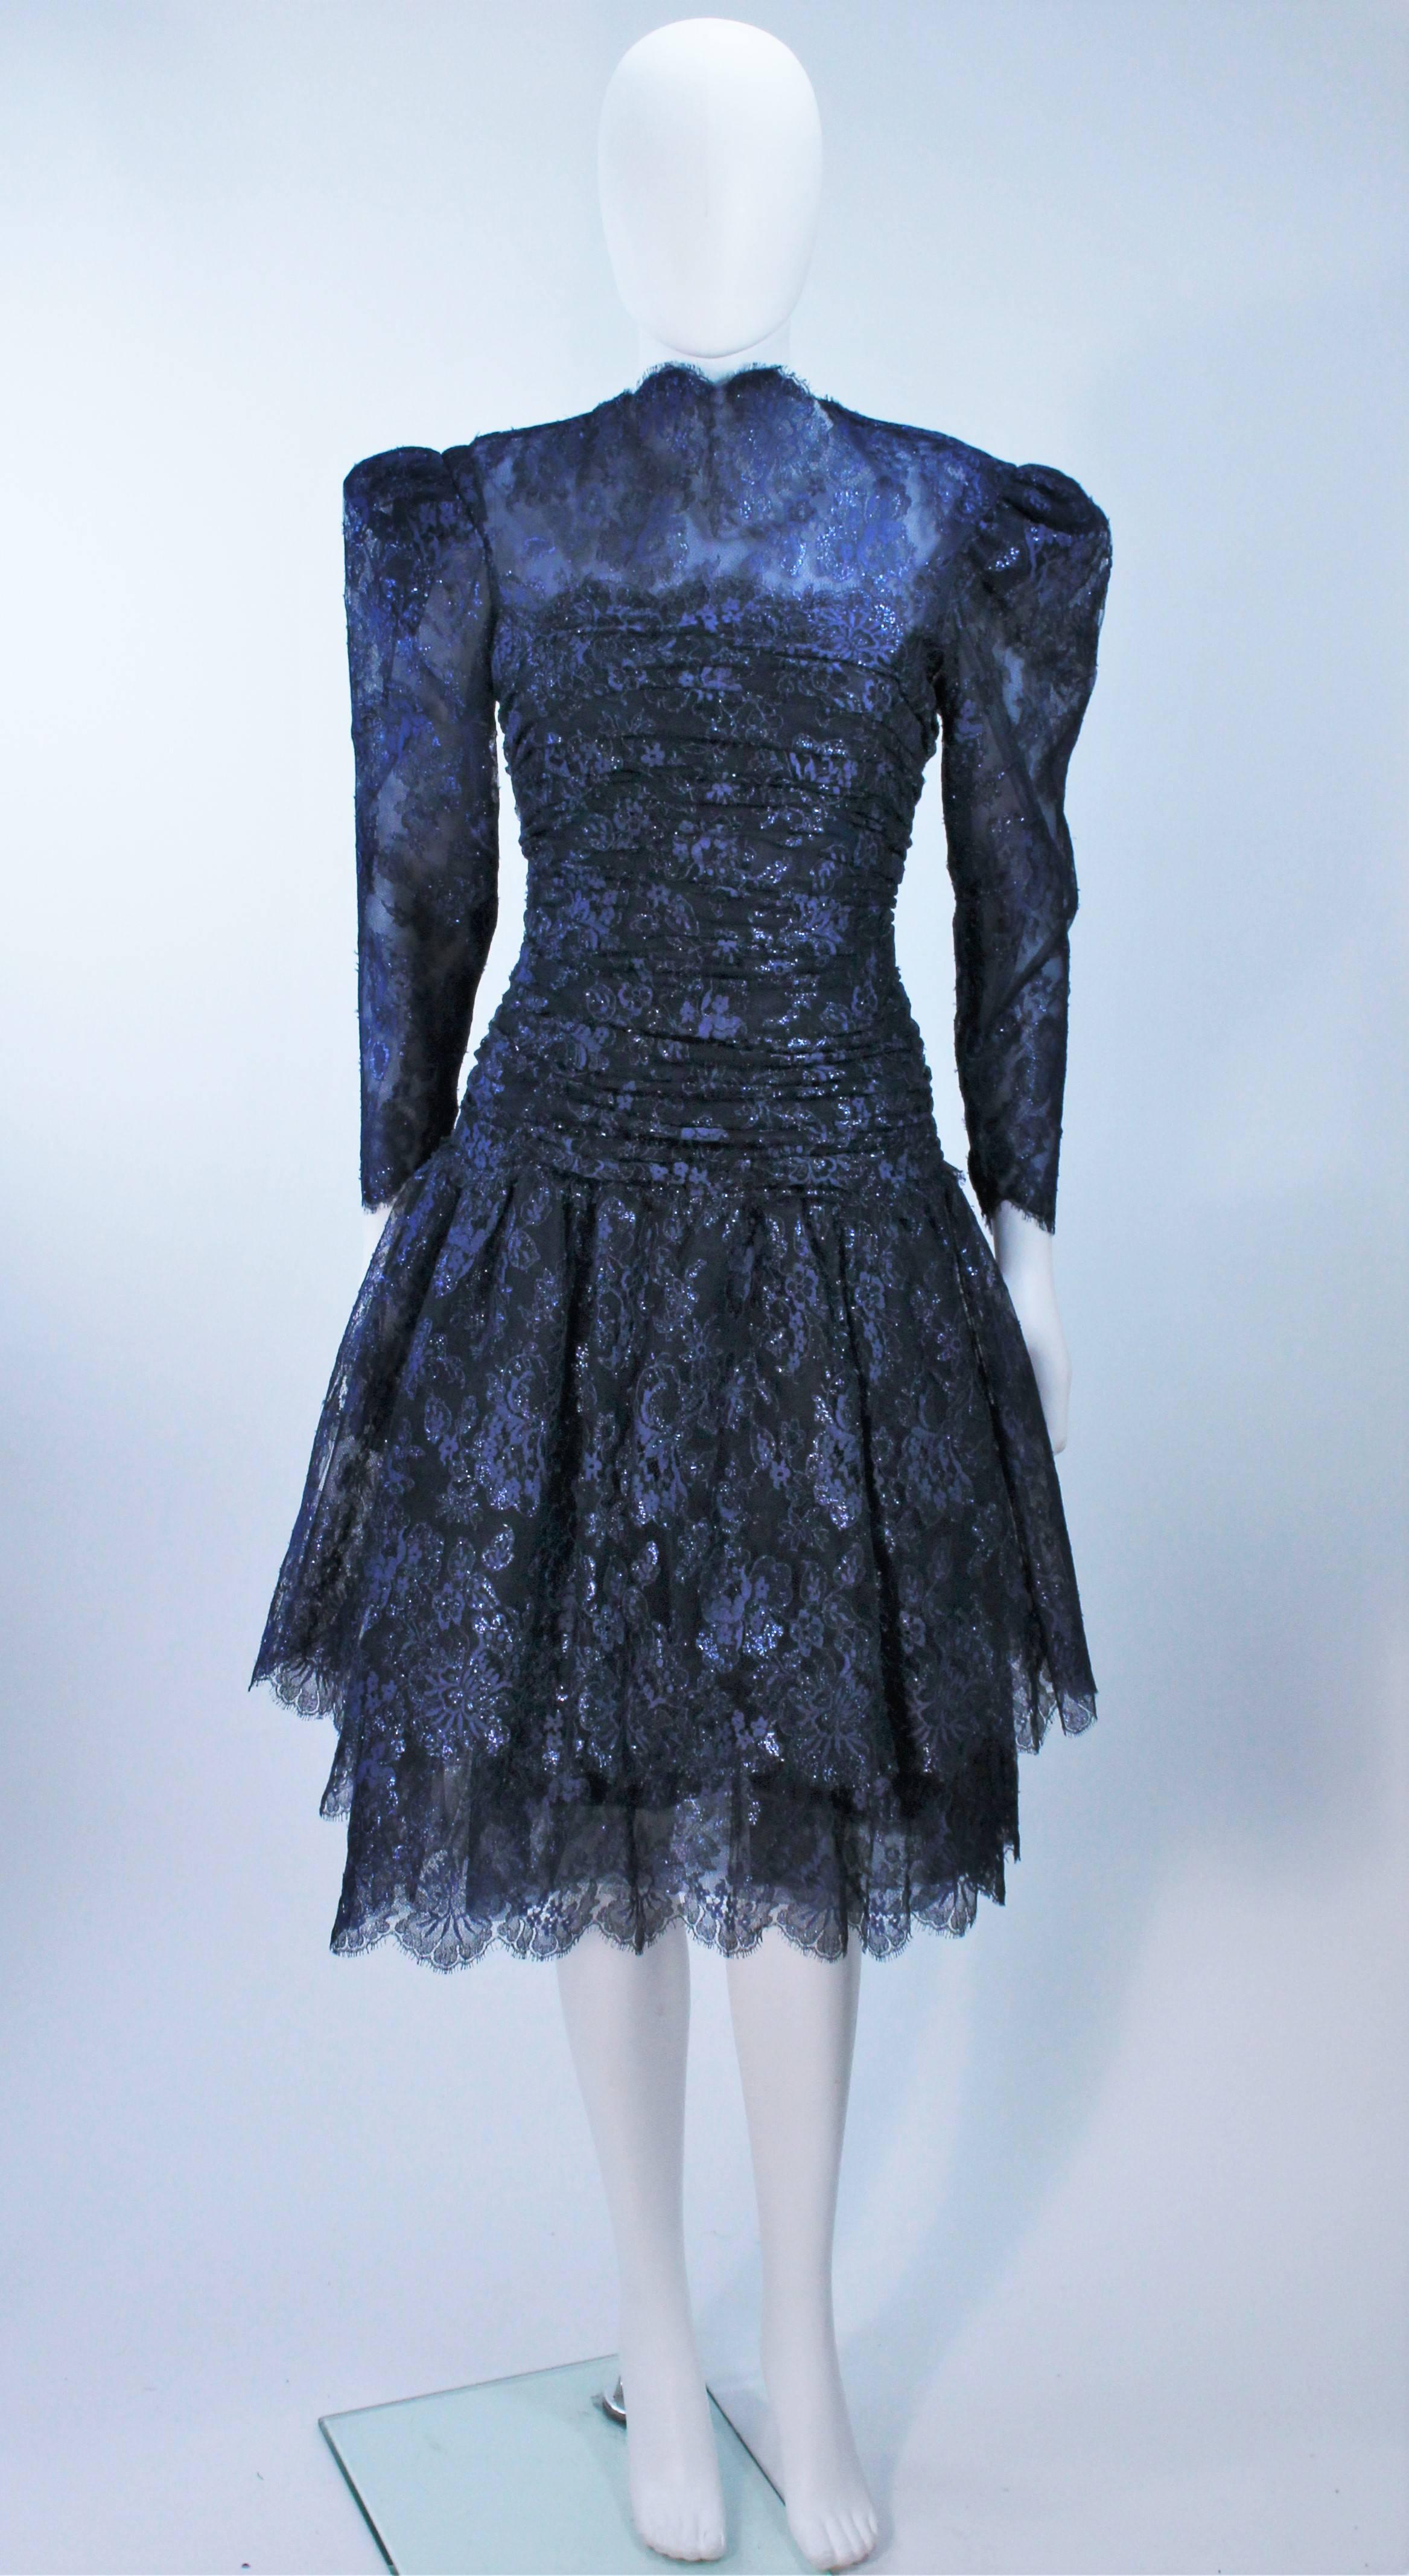  This Arnold Scaasi  cocktail dress is composed of a metallic navy lace with scalloped edges. There is a center back zipper closure, ruched waist details, and shoulder pad details. In excellent vintage condition. 

  **Please cross-reference